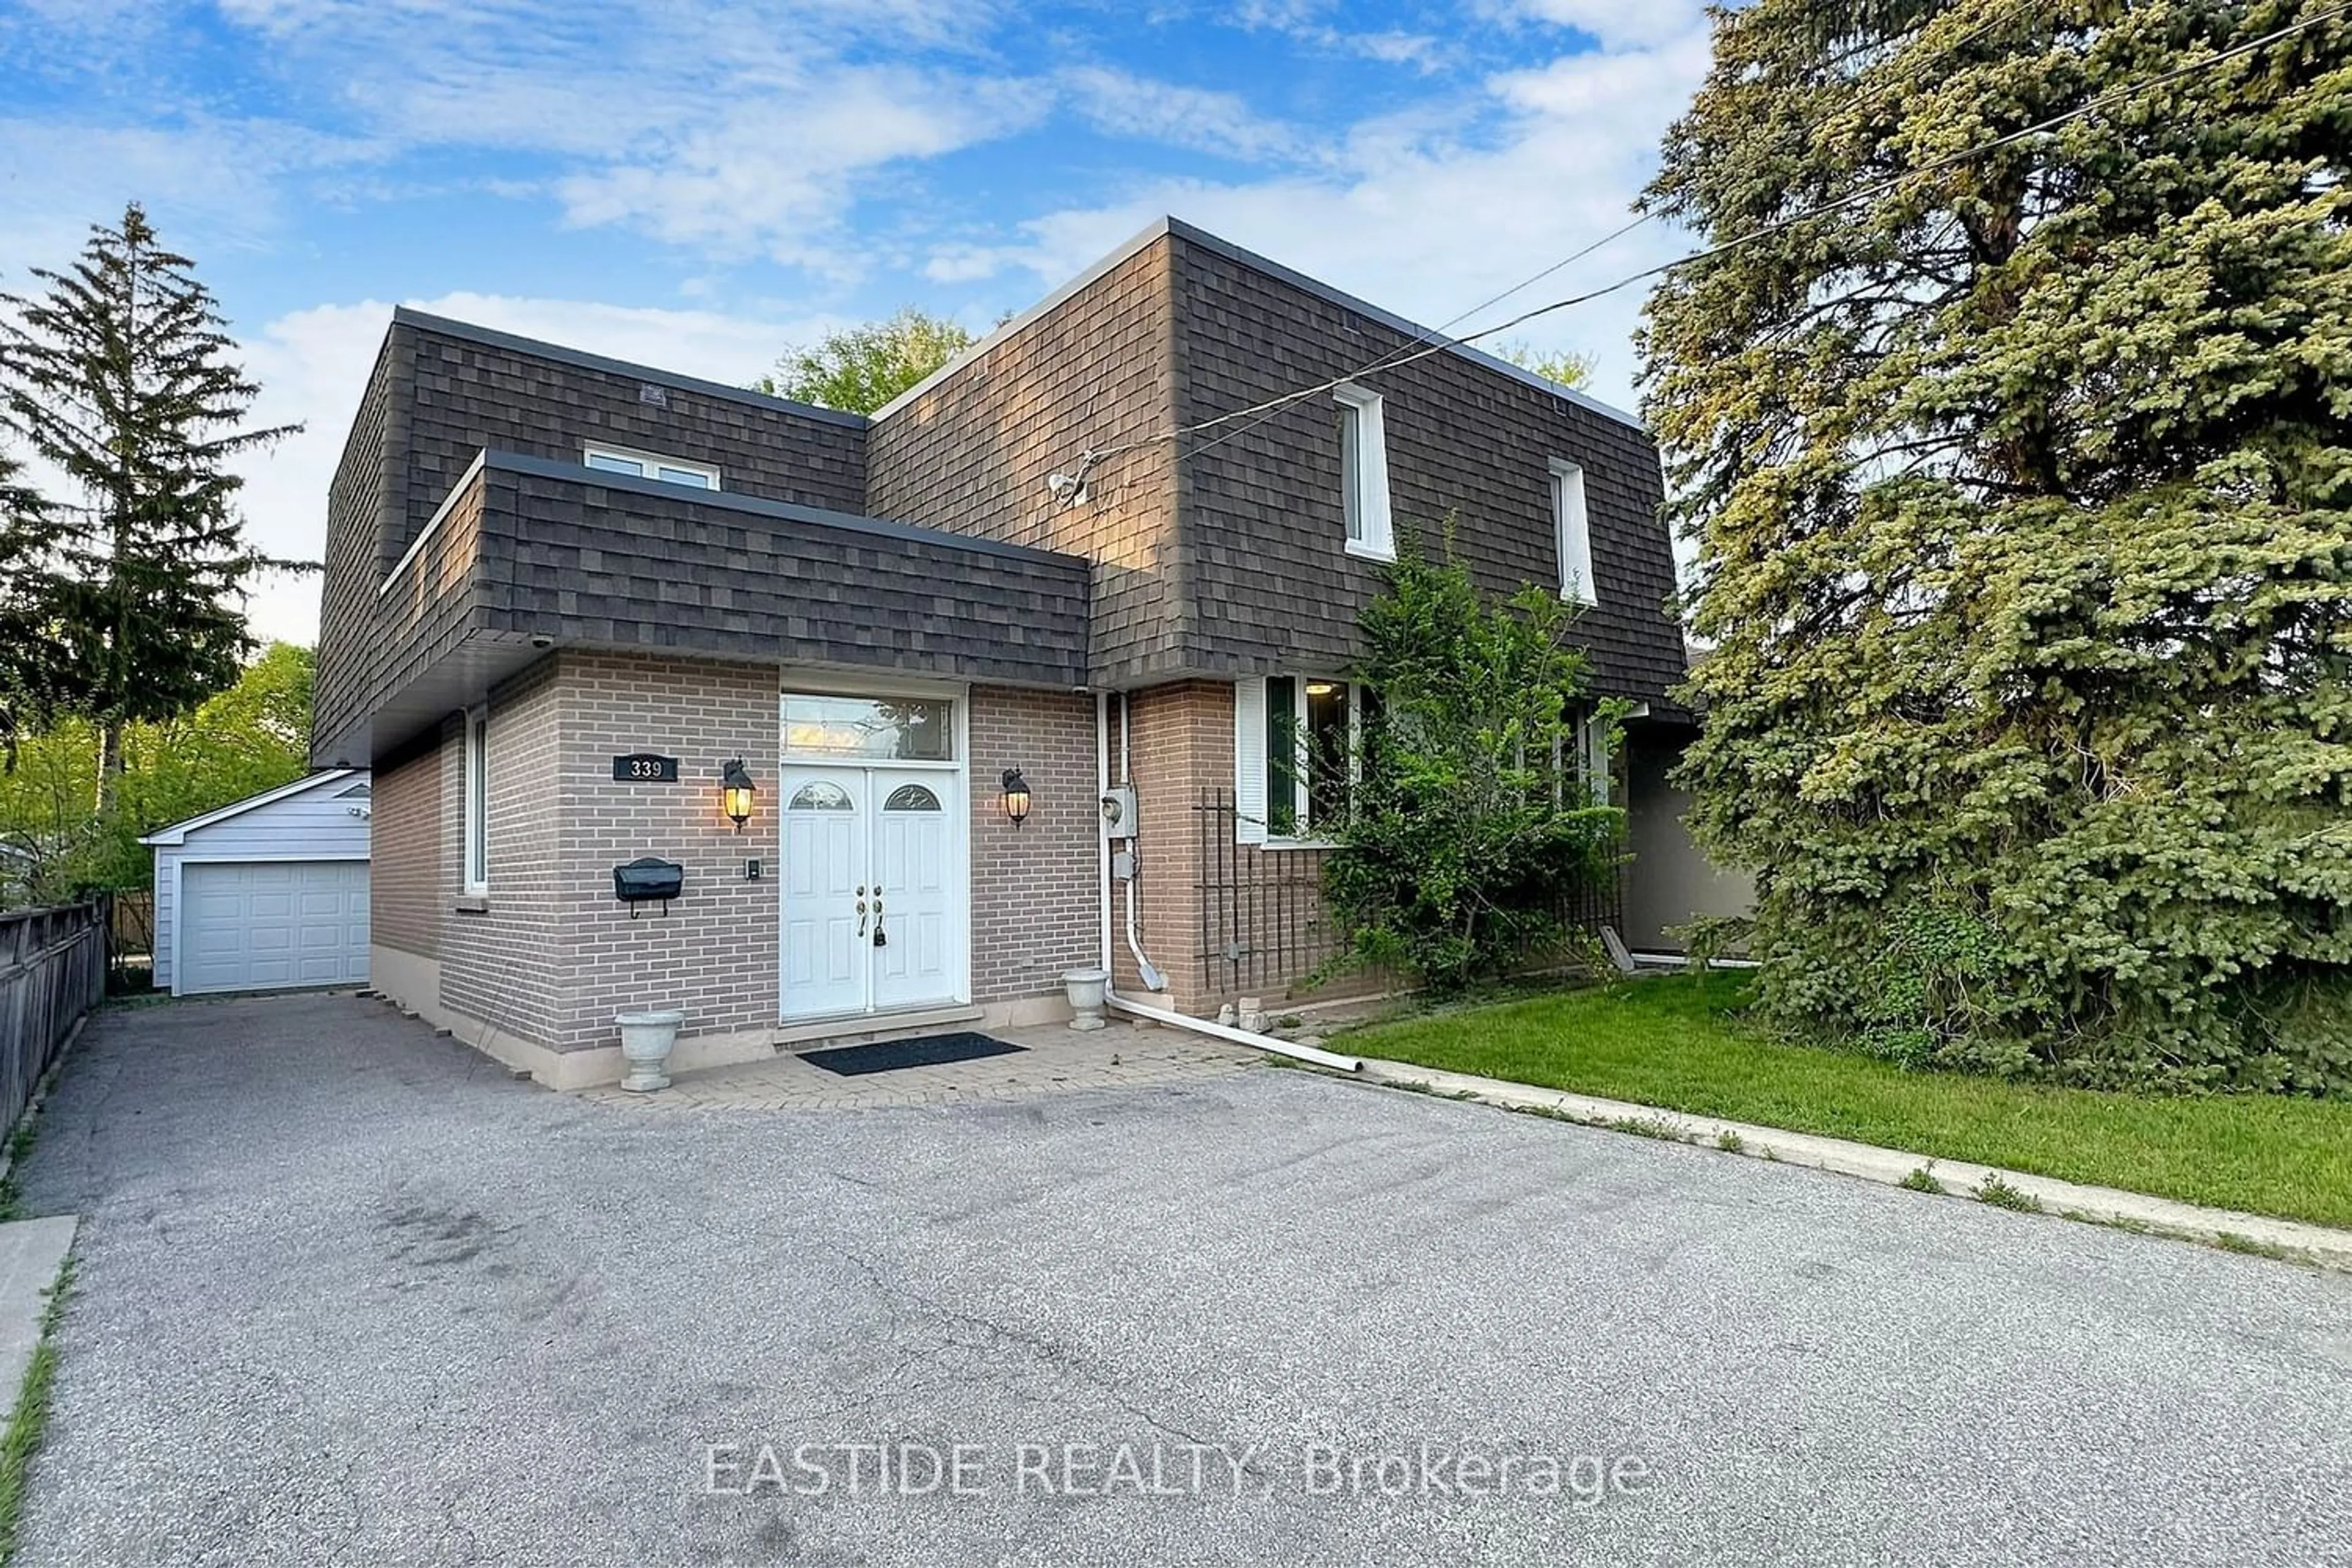 Home with brick exterior material for 339 Elmwood Ave, Richmond Hill Ontario L4C 1L7